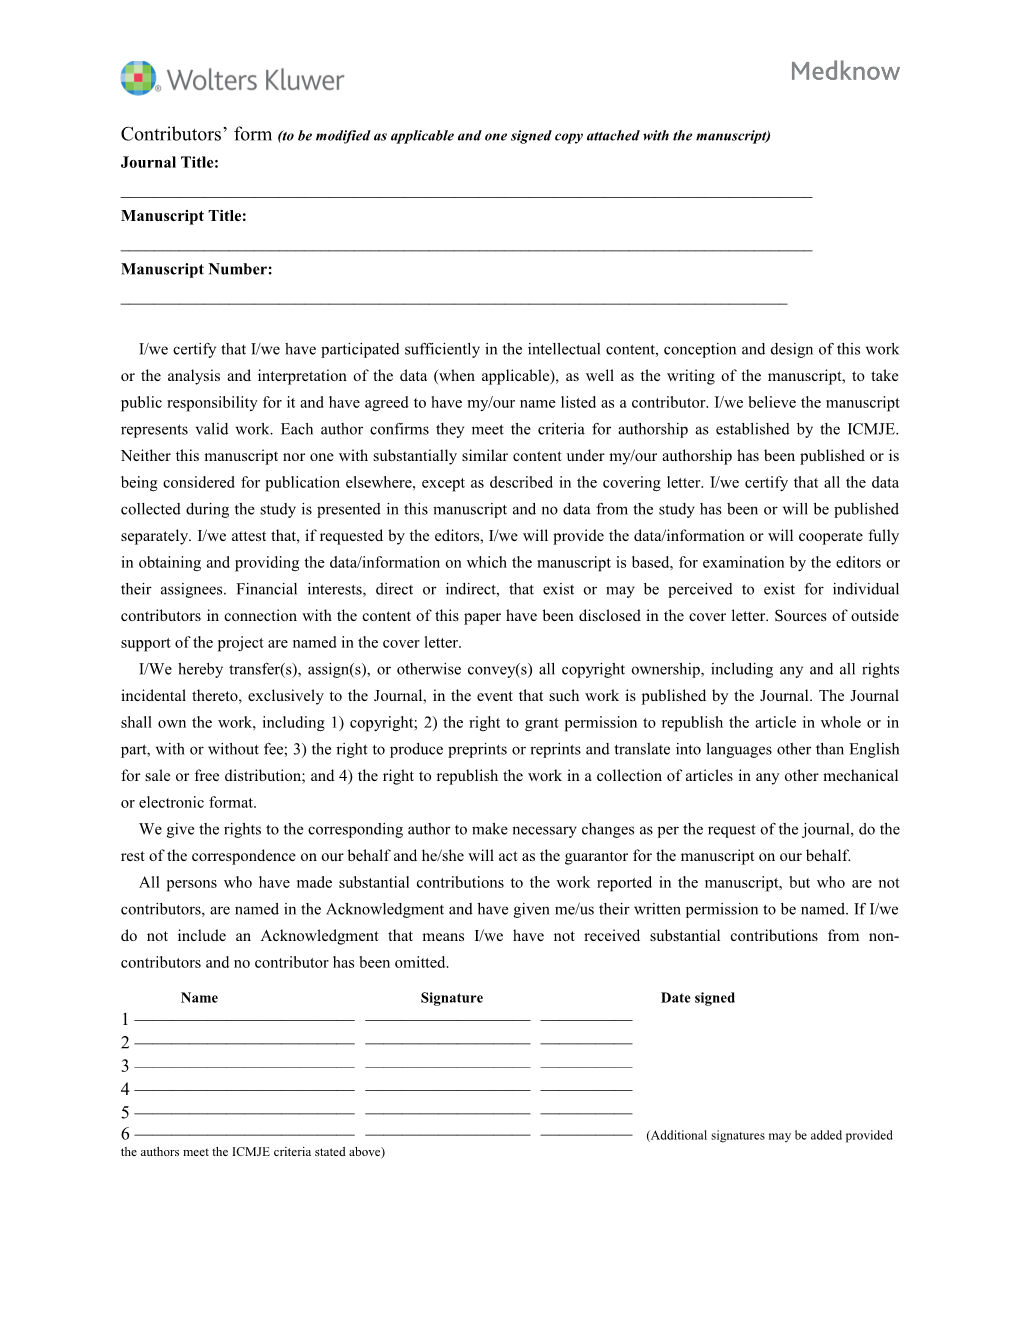 Contributors Form (To Be Modified As Applicable and One Signed Copy Attached with The